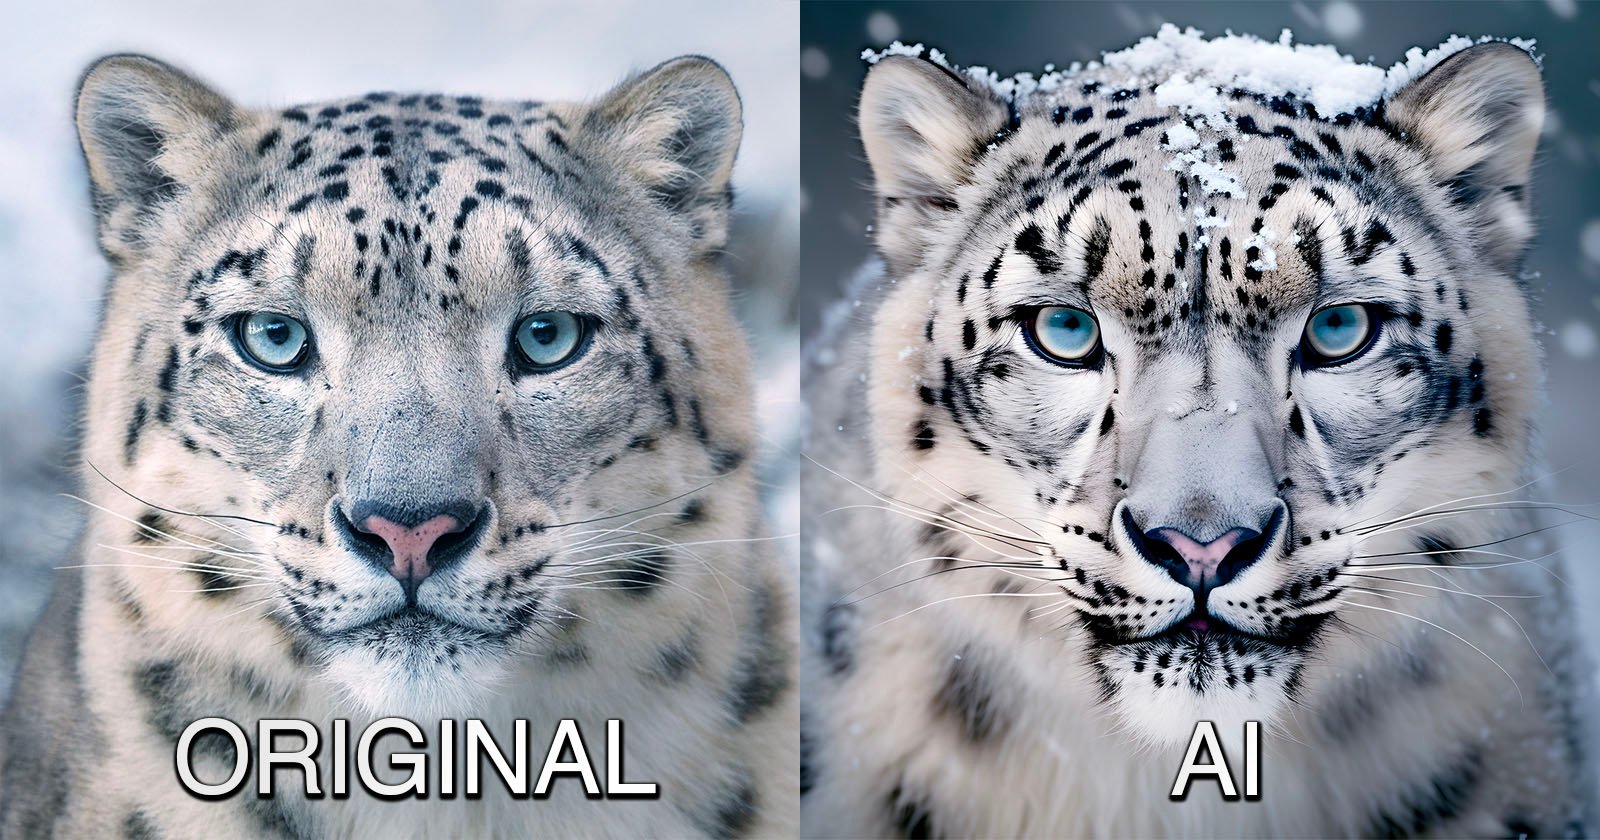 Famed Photographer Shows How Easy it is to Recreate His Photos With AI